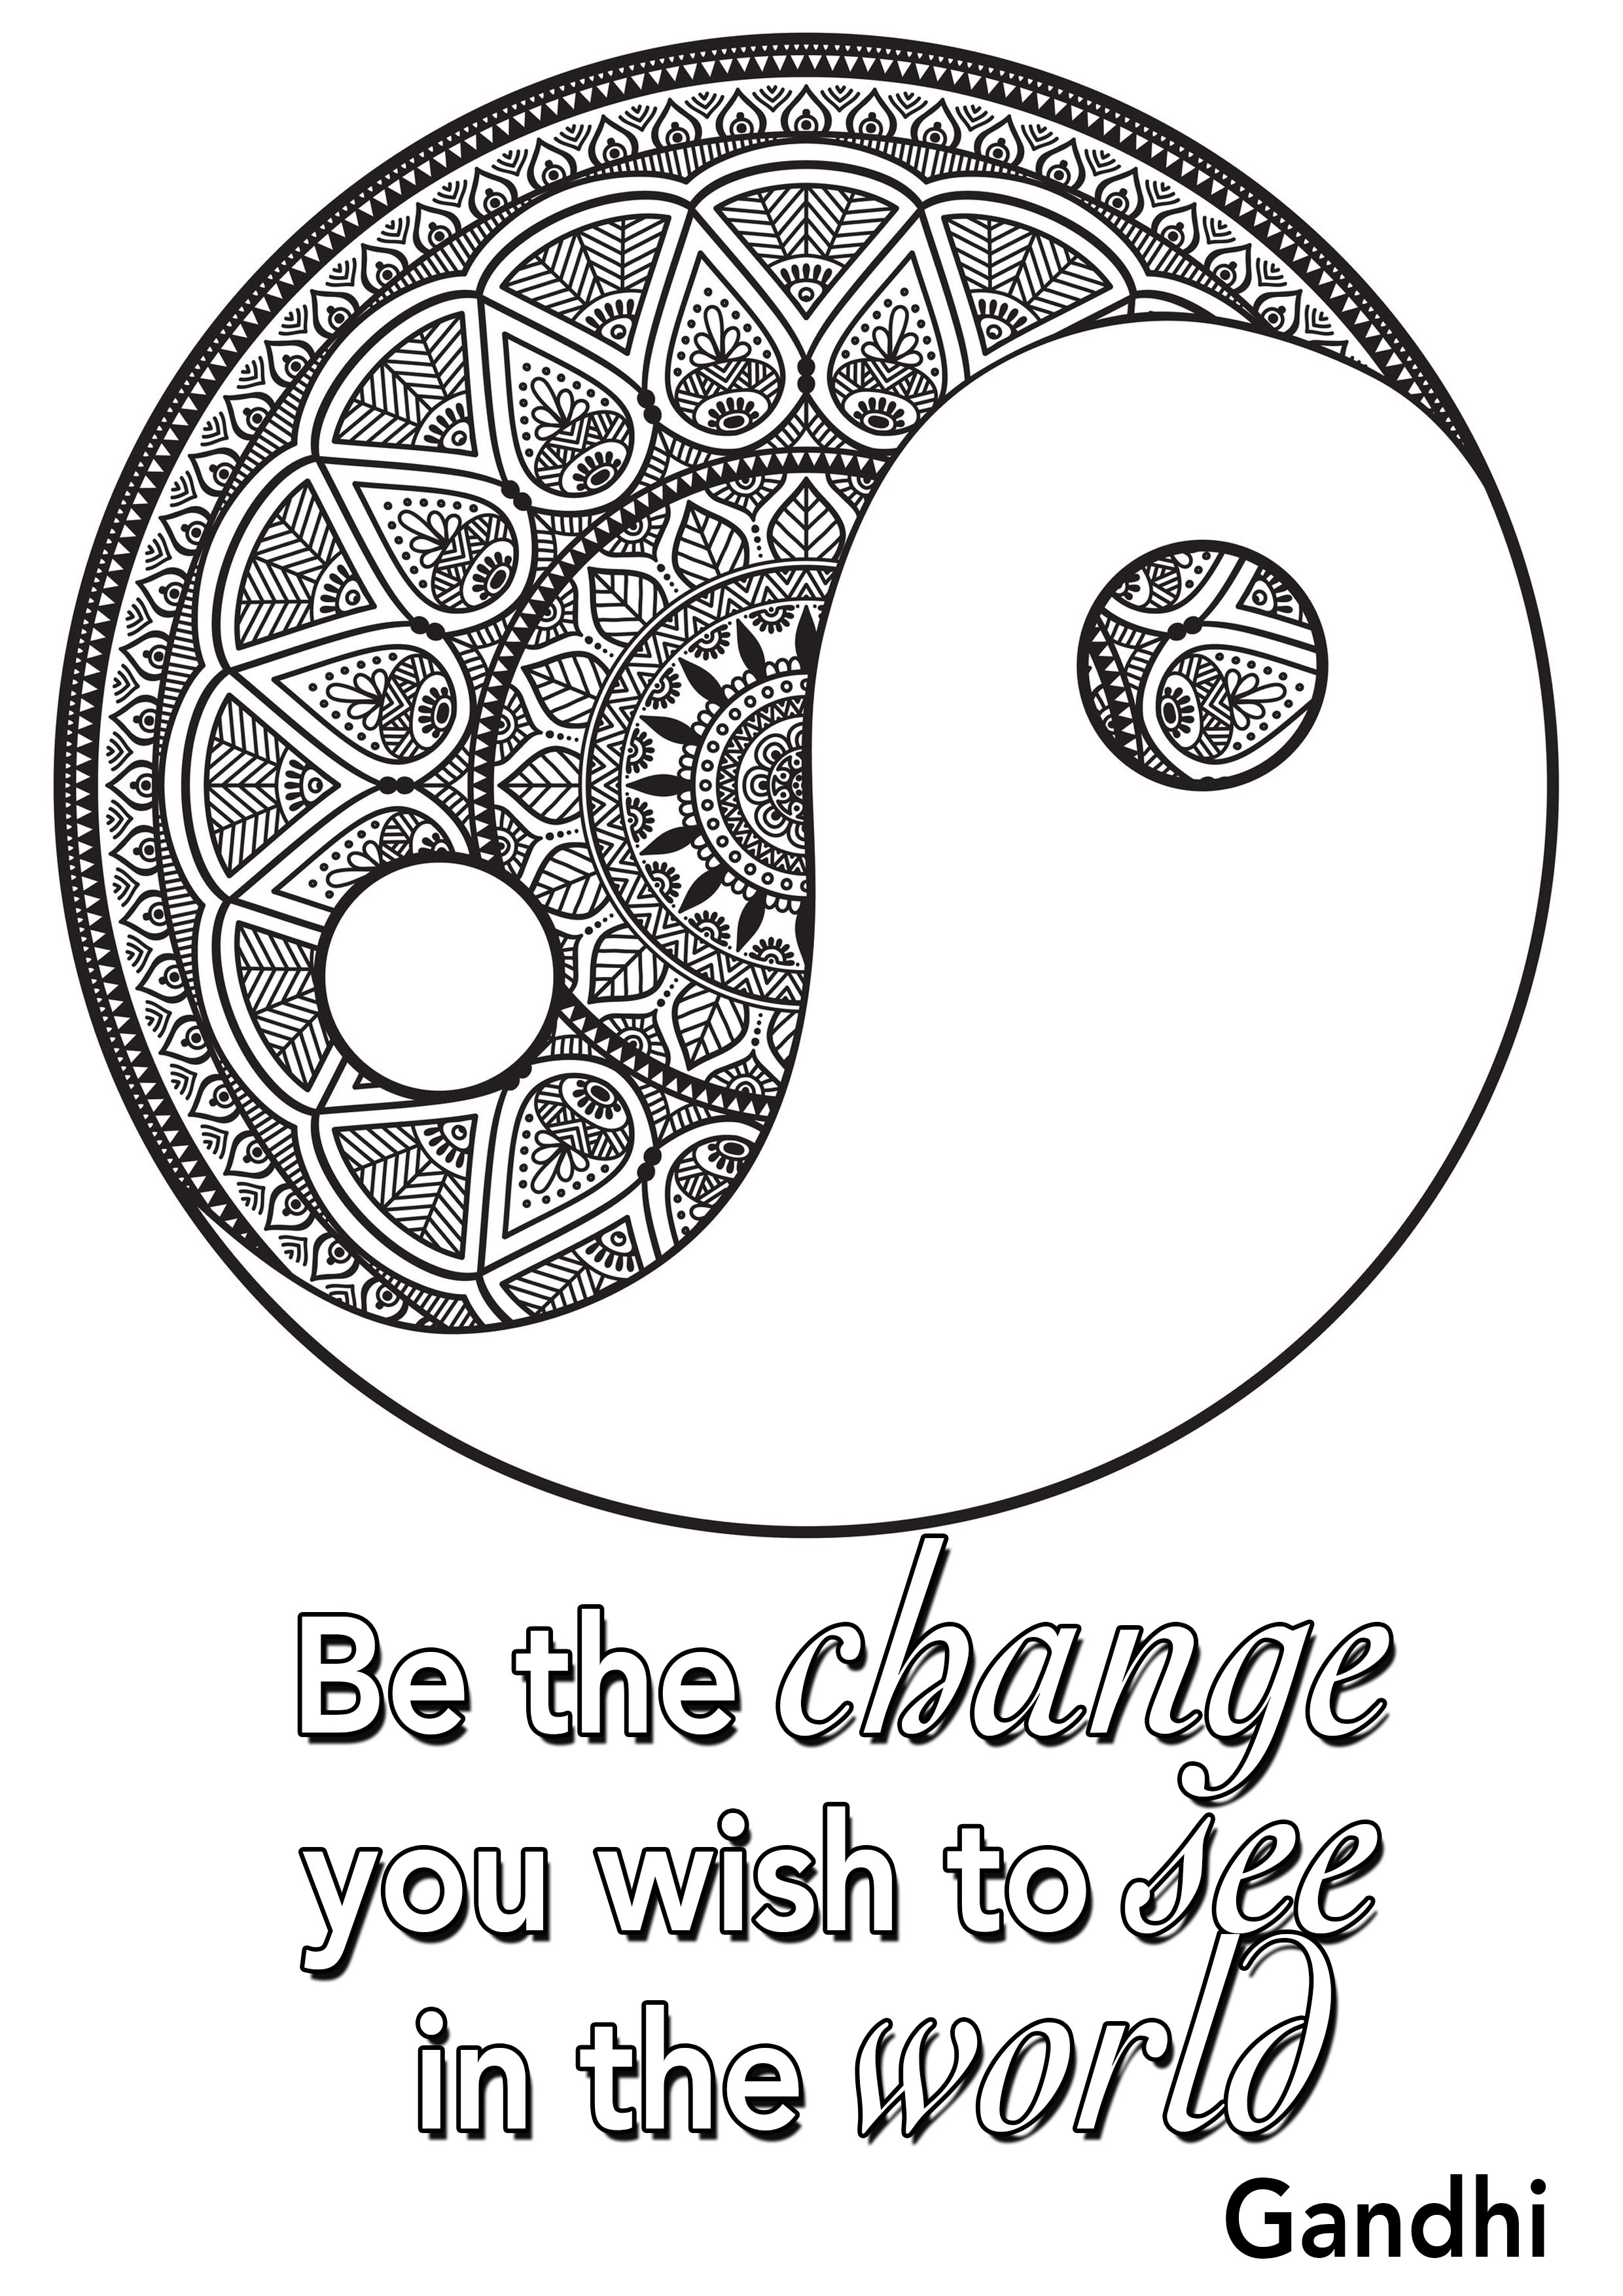 'Be the change you wish to see in the world (Ghandi)' : A quote to color with a Yin & Yang symbol full of incredible and complex patterns